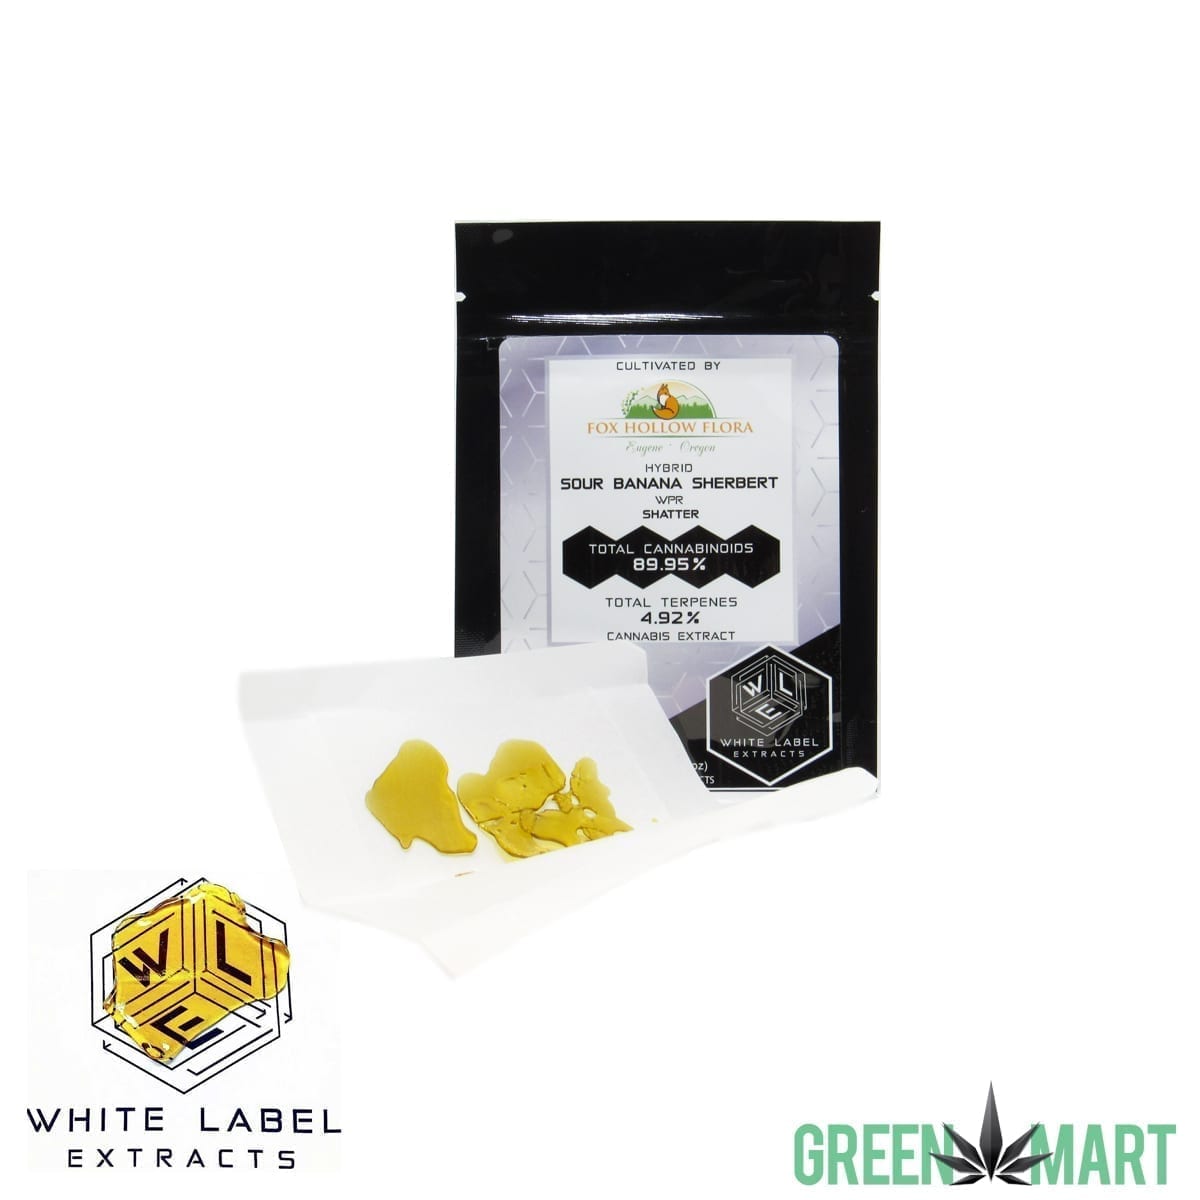 White Label Extracts - Sour Banana Sherbet